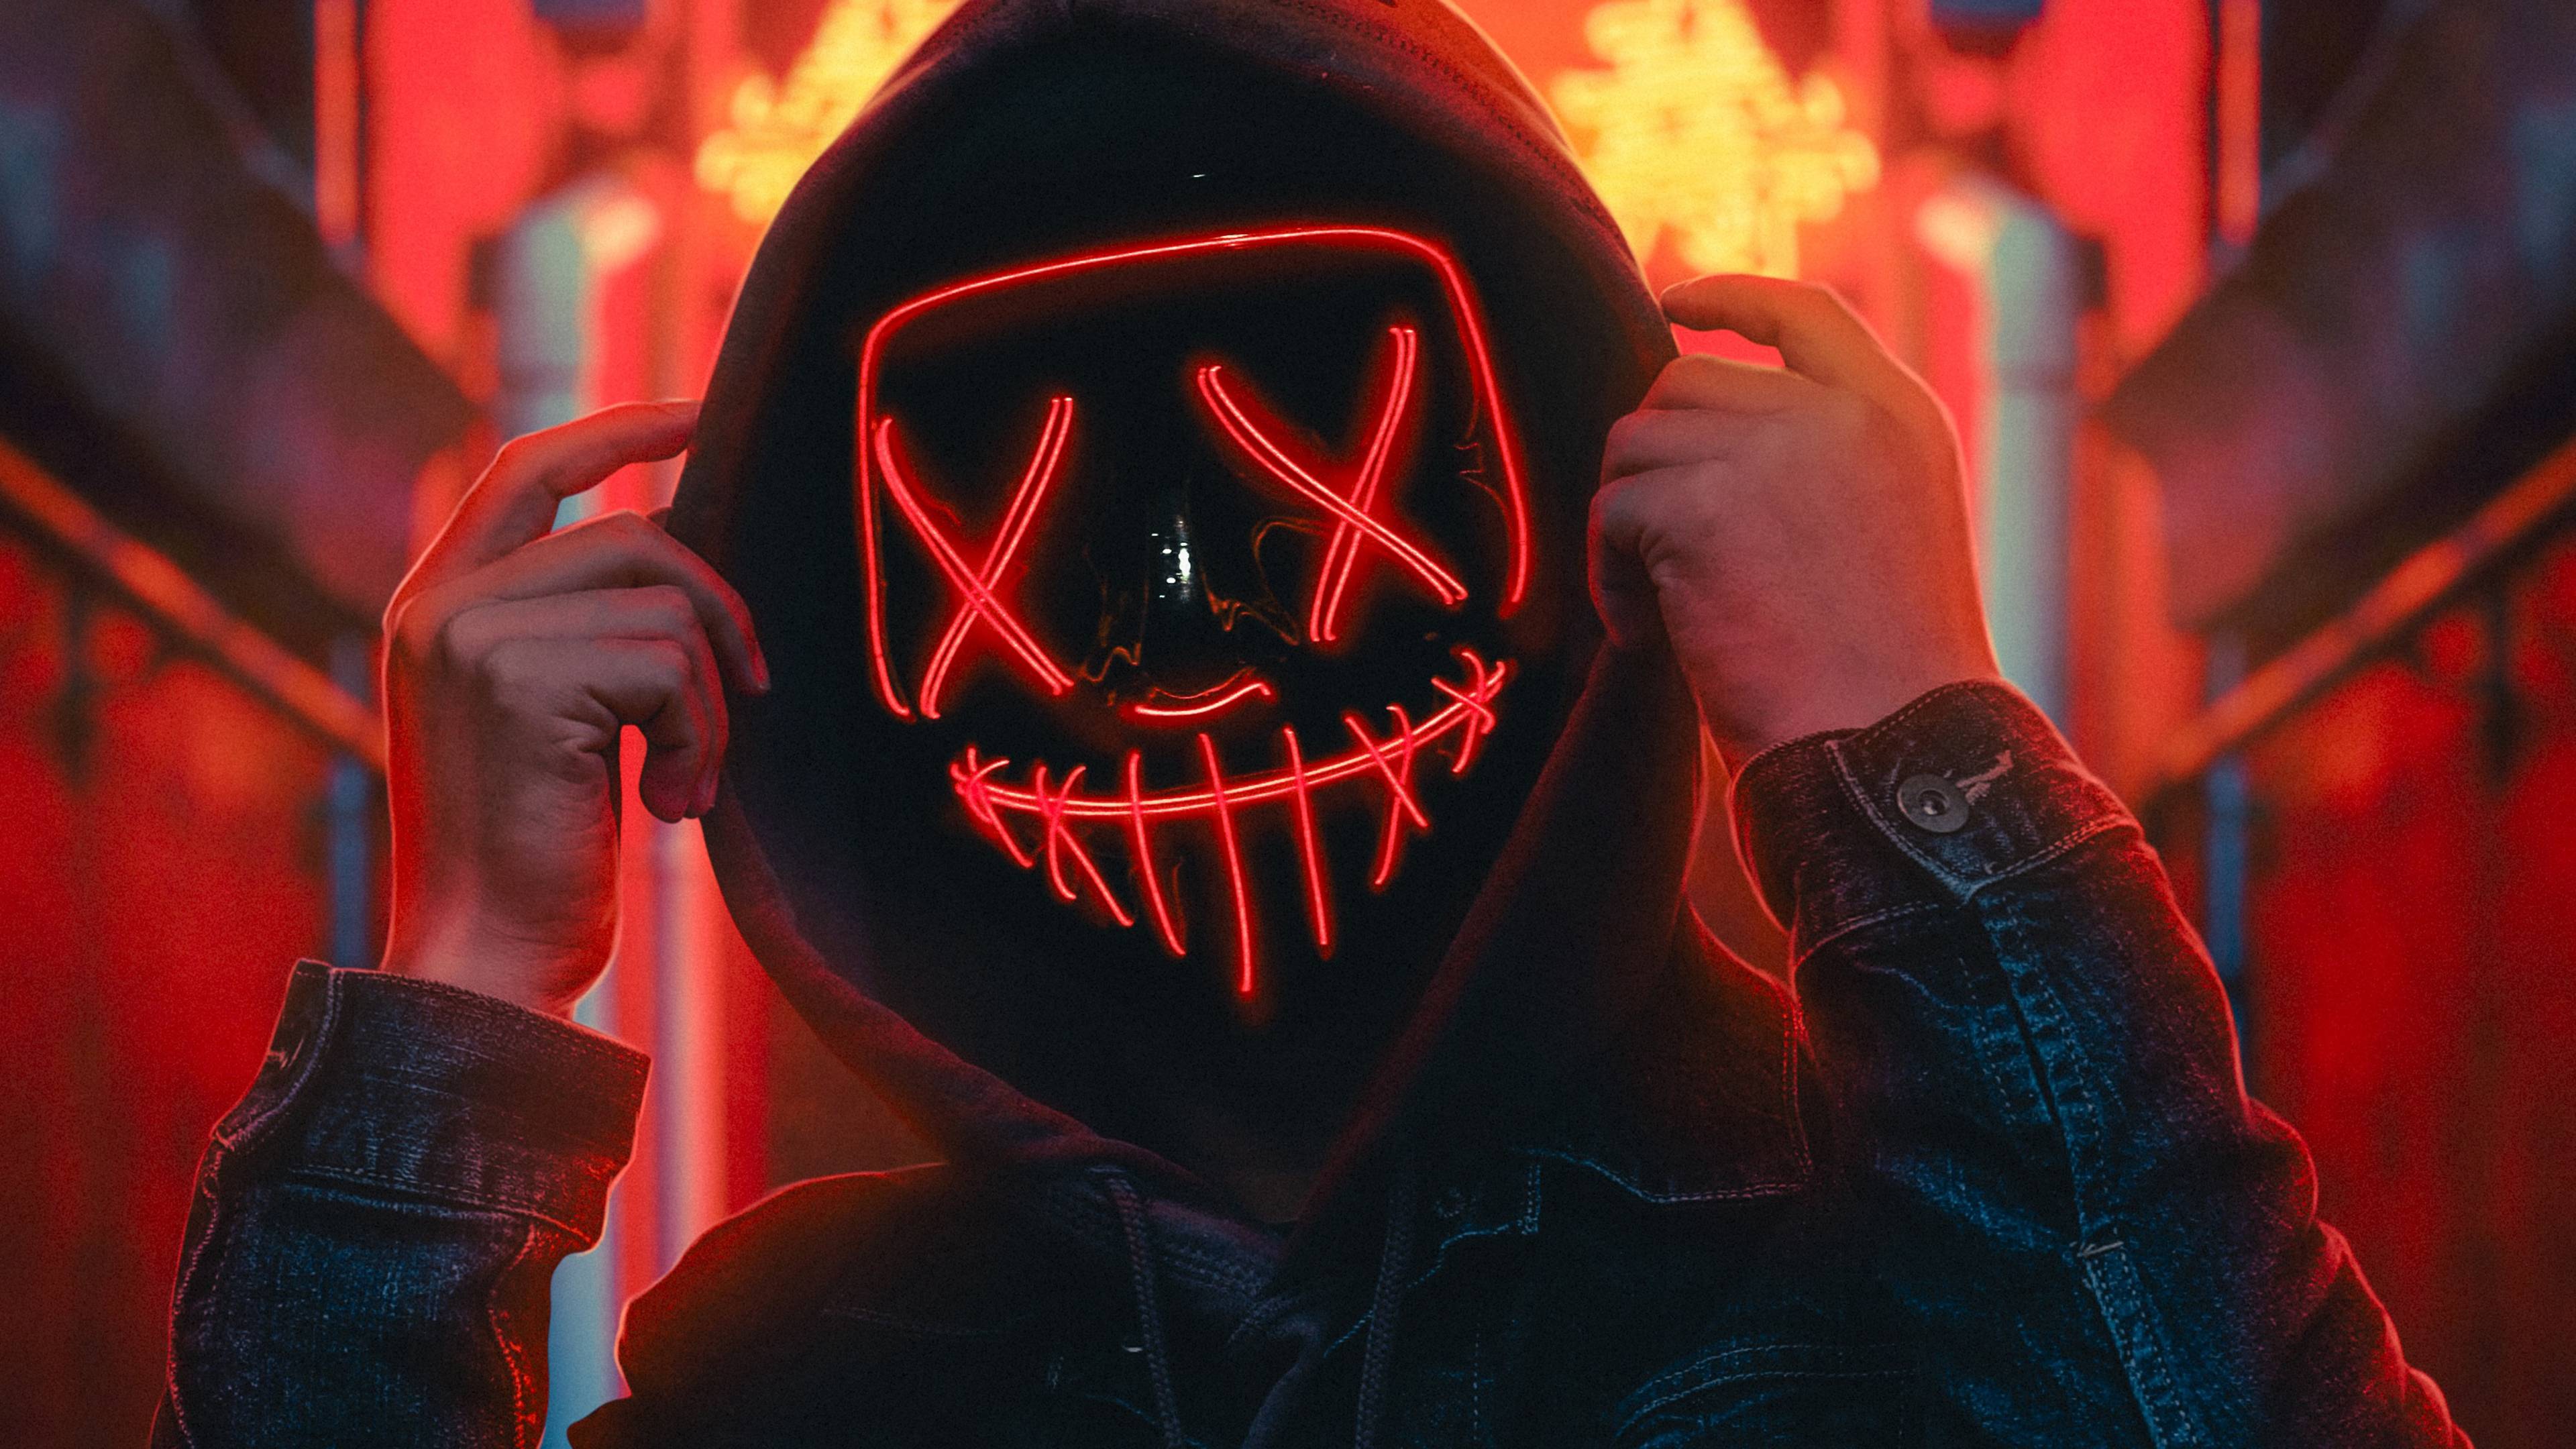 A person wearing an illuminated mask - Neon red, light red